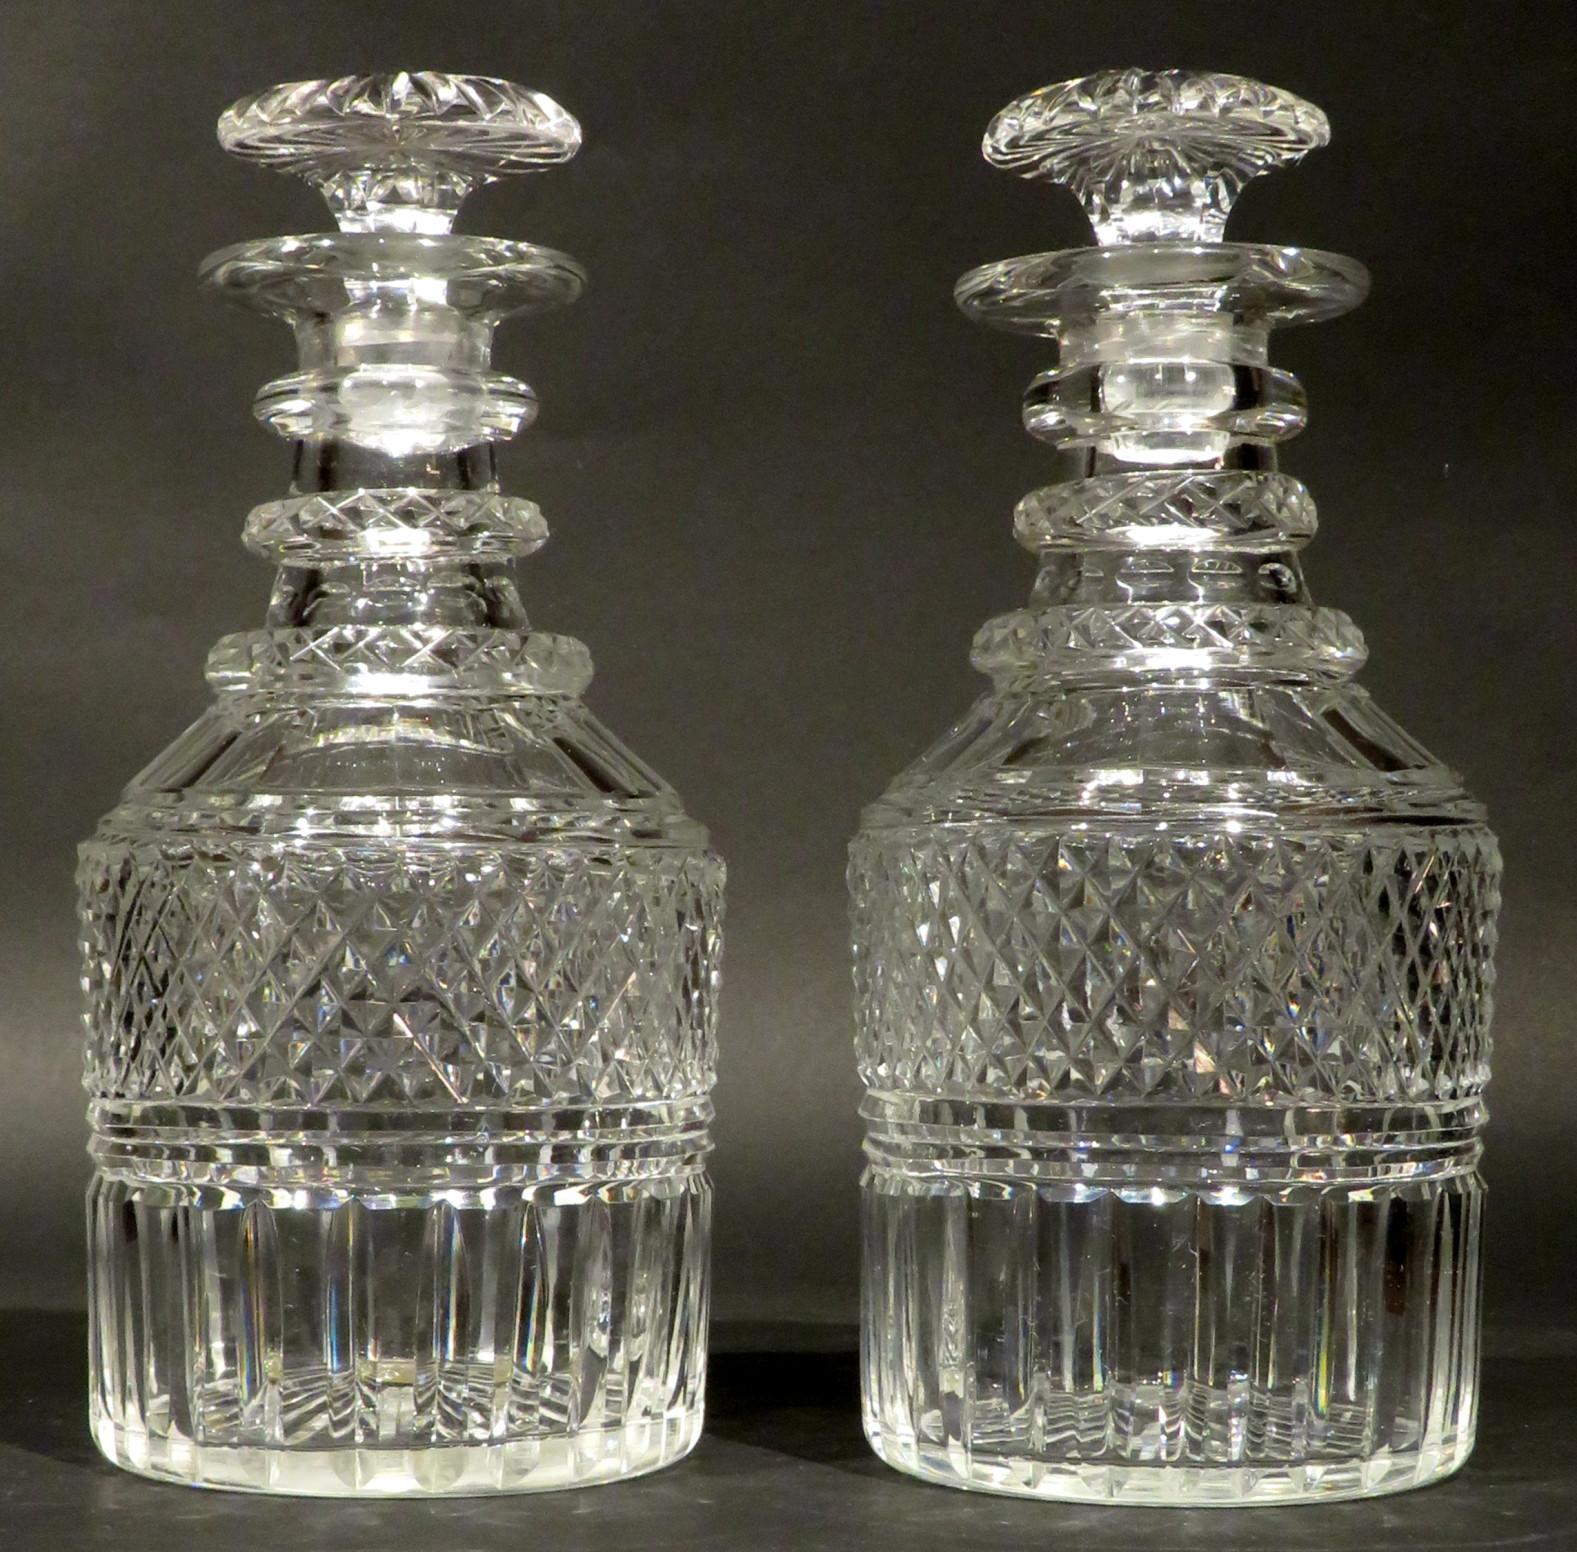 British A Very Good Pair of Regency Period Anglo-Irish Cut Glass Decanters, Circa 1825